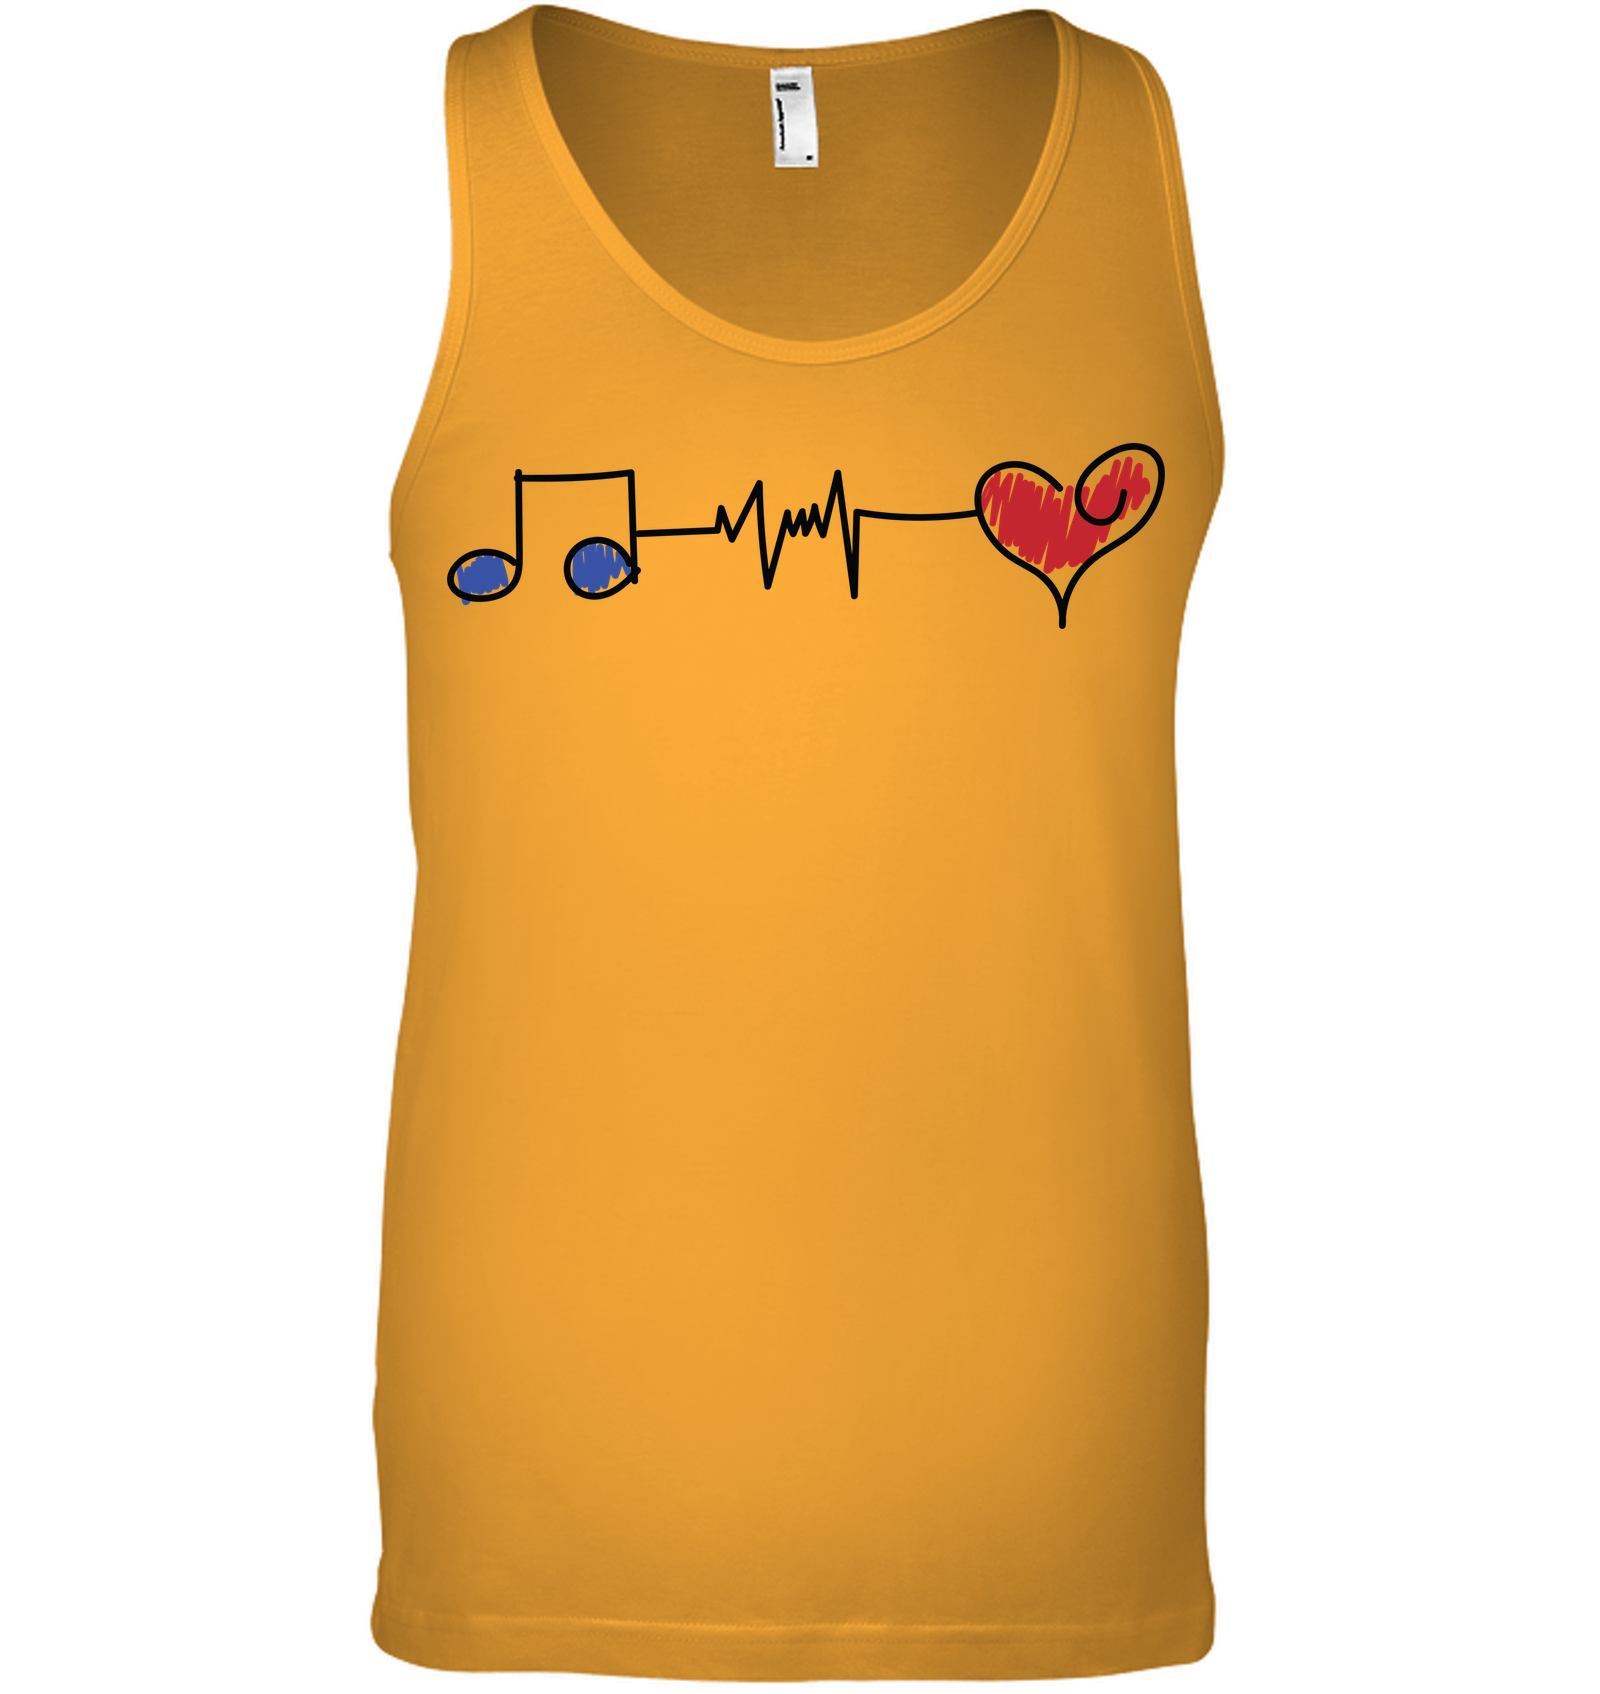 Musical Connections Blue - Bella + Canvas Unisex Jersey Tank